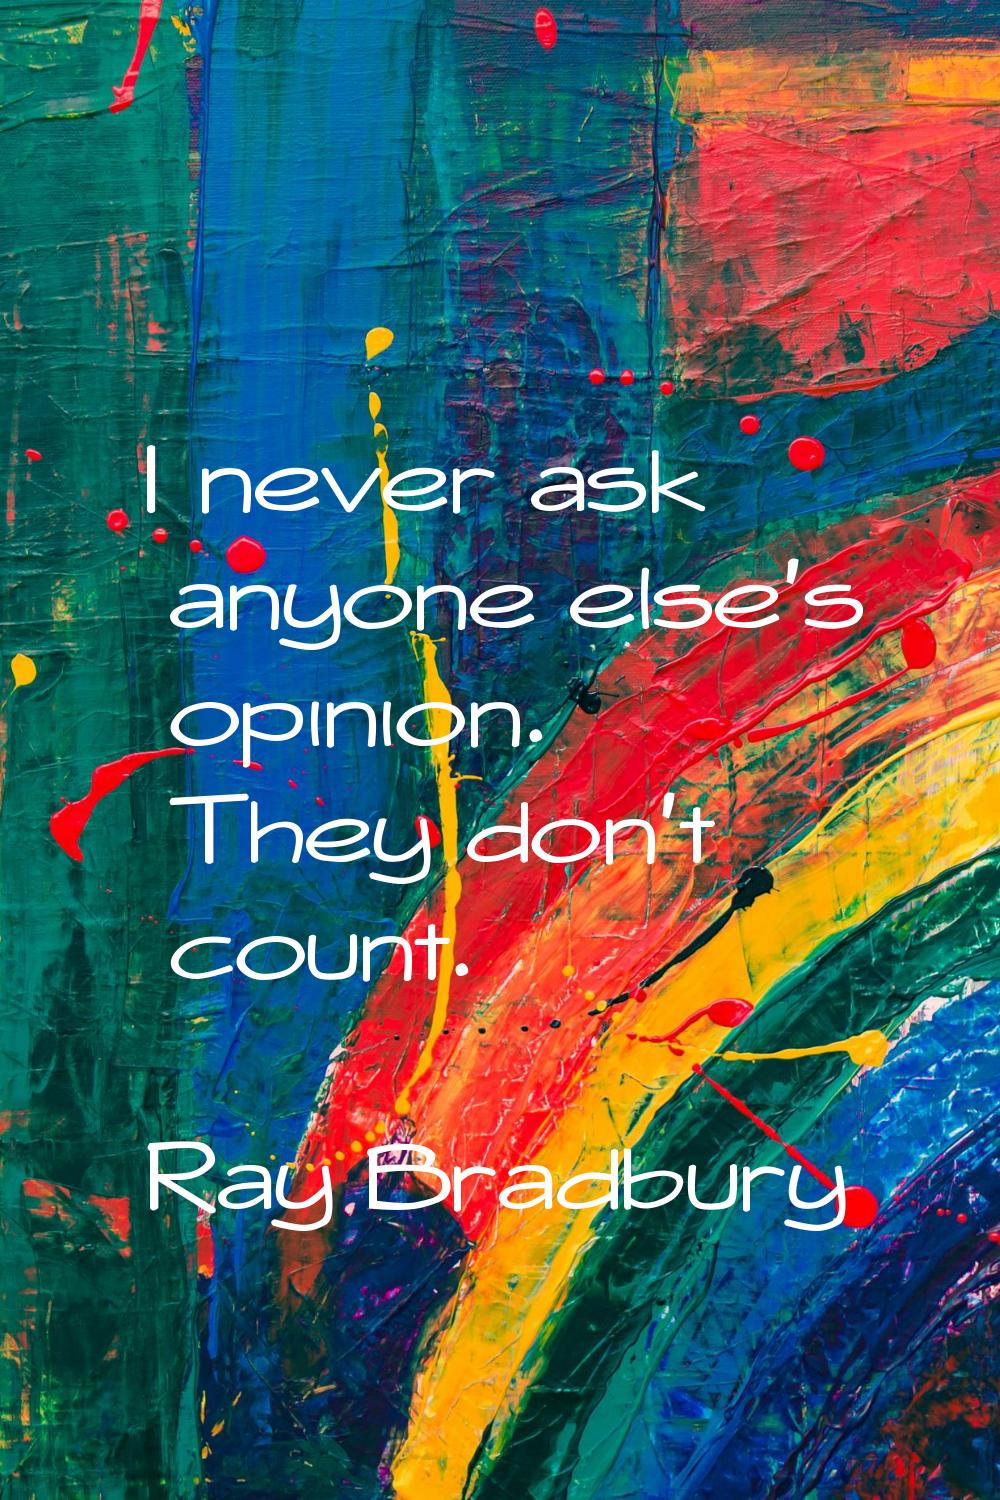 I never ask anyone else's opinion. They don't count.